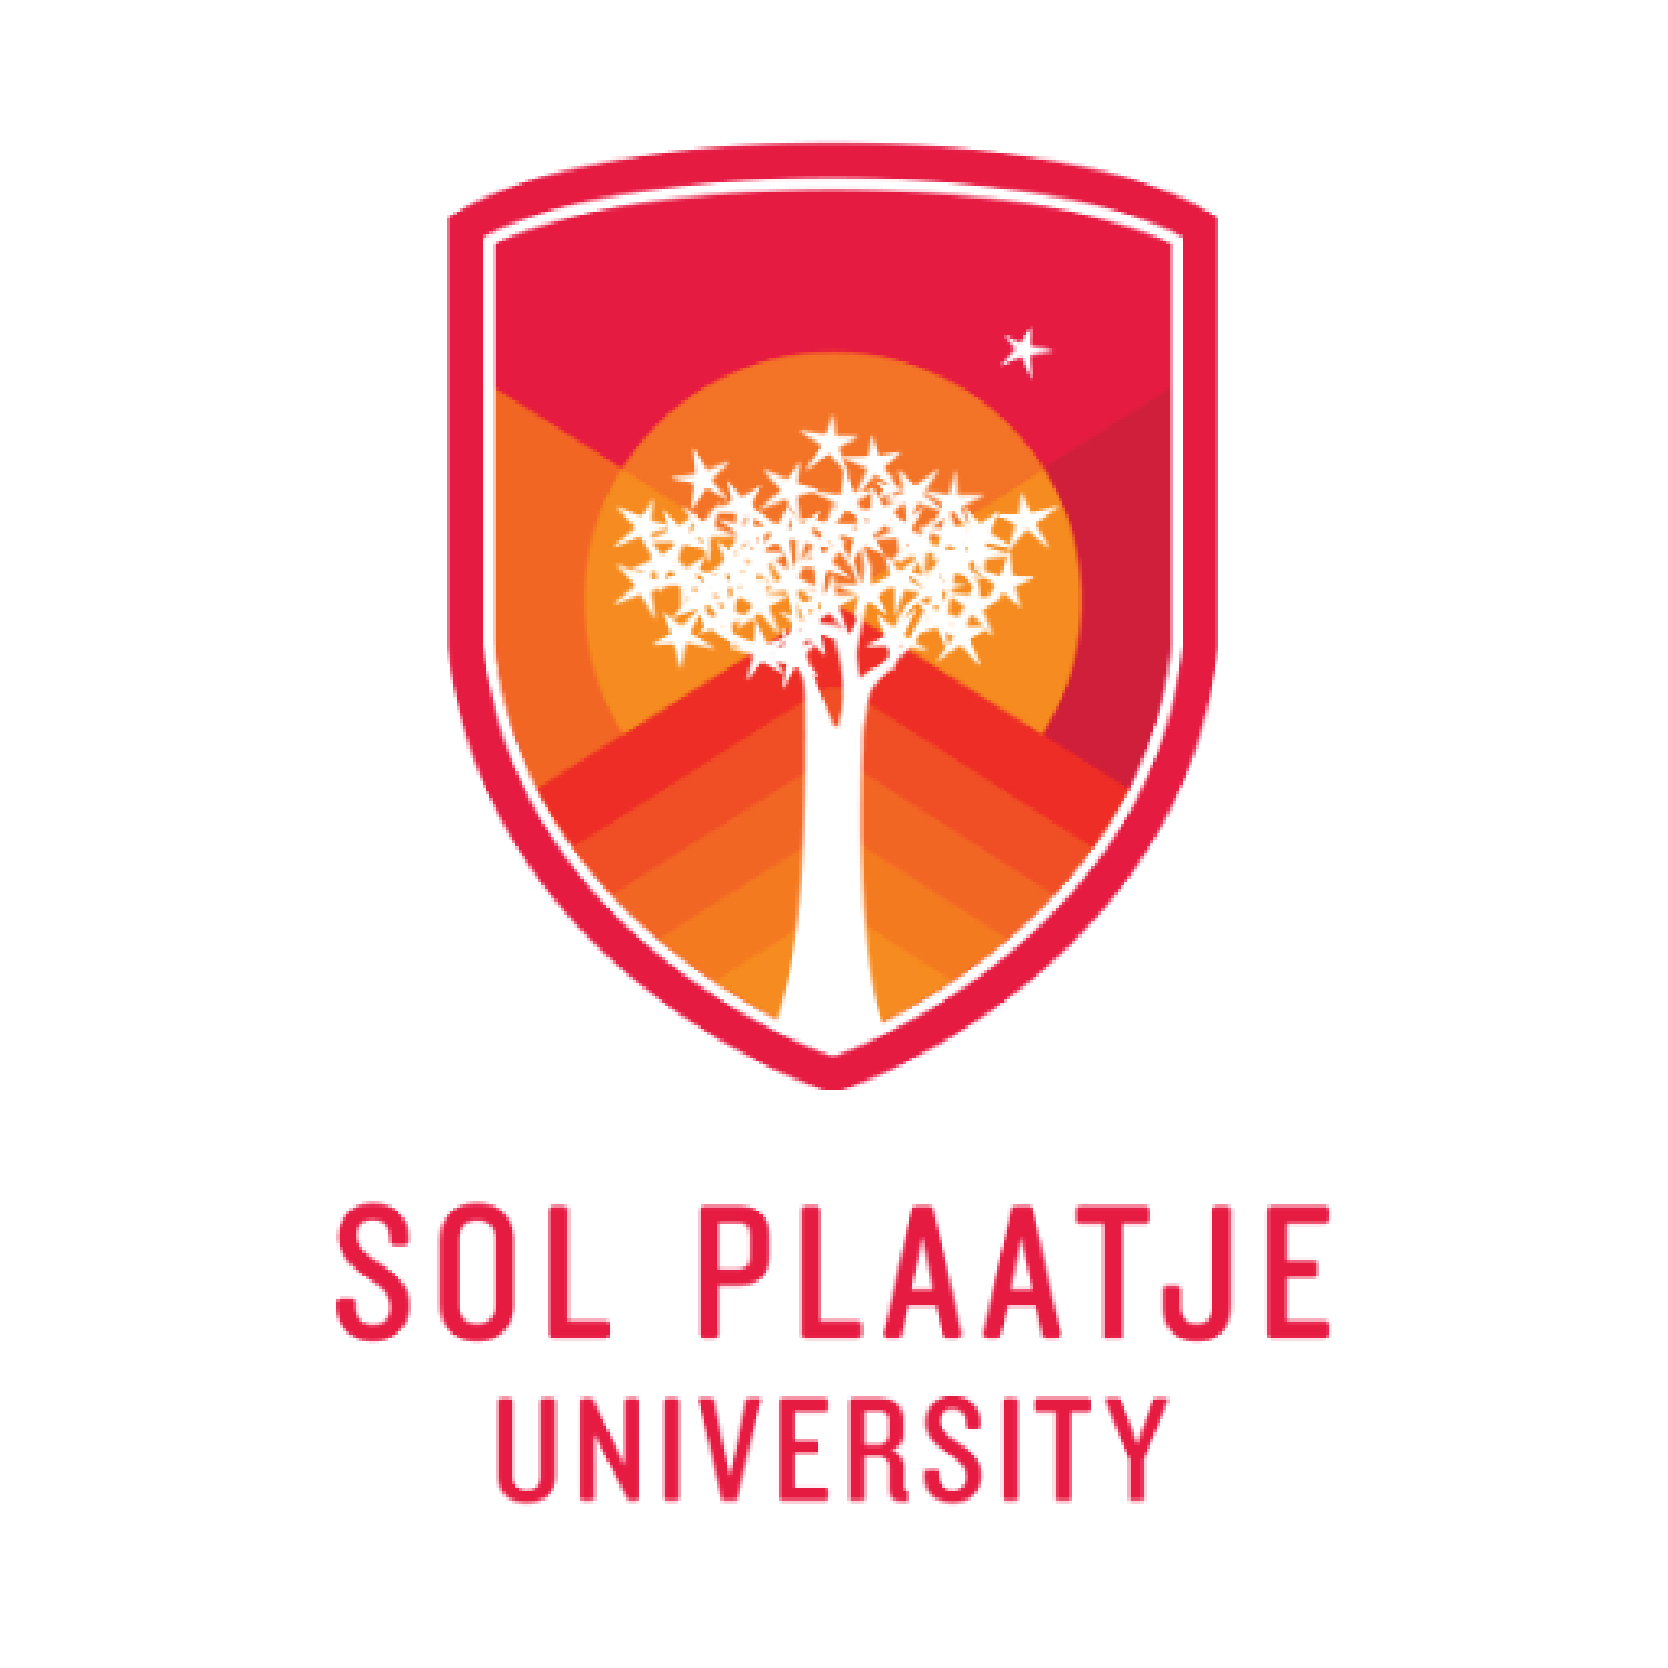 SOL PLAATJE UNIVERSITY, SOUTH AFRICA